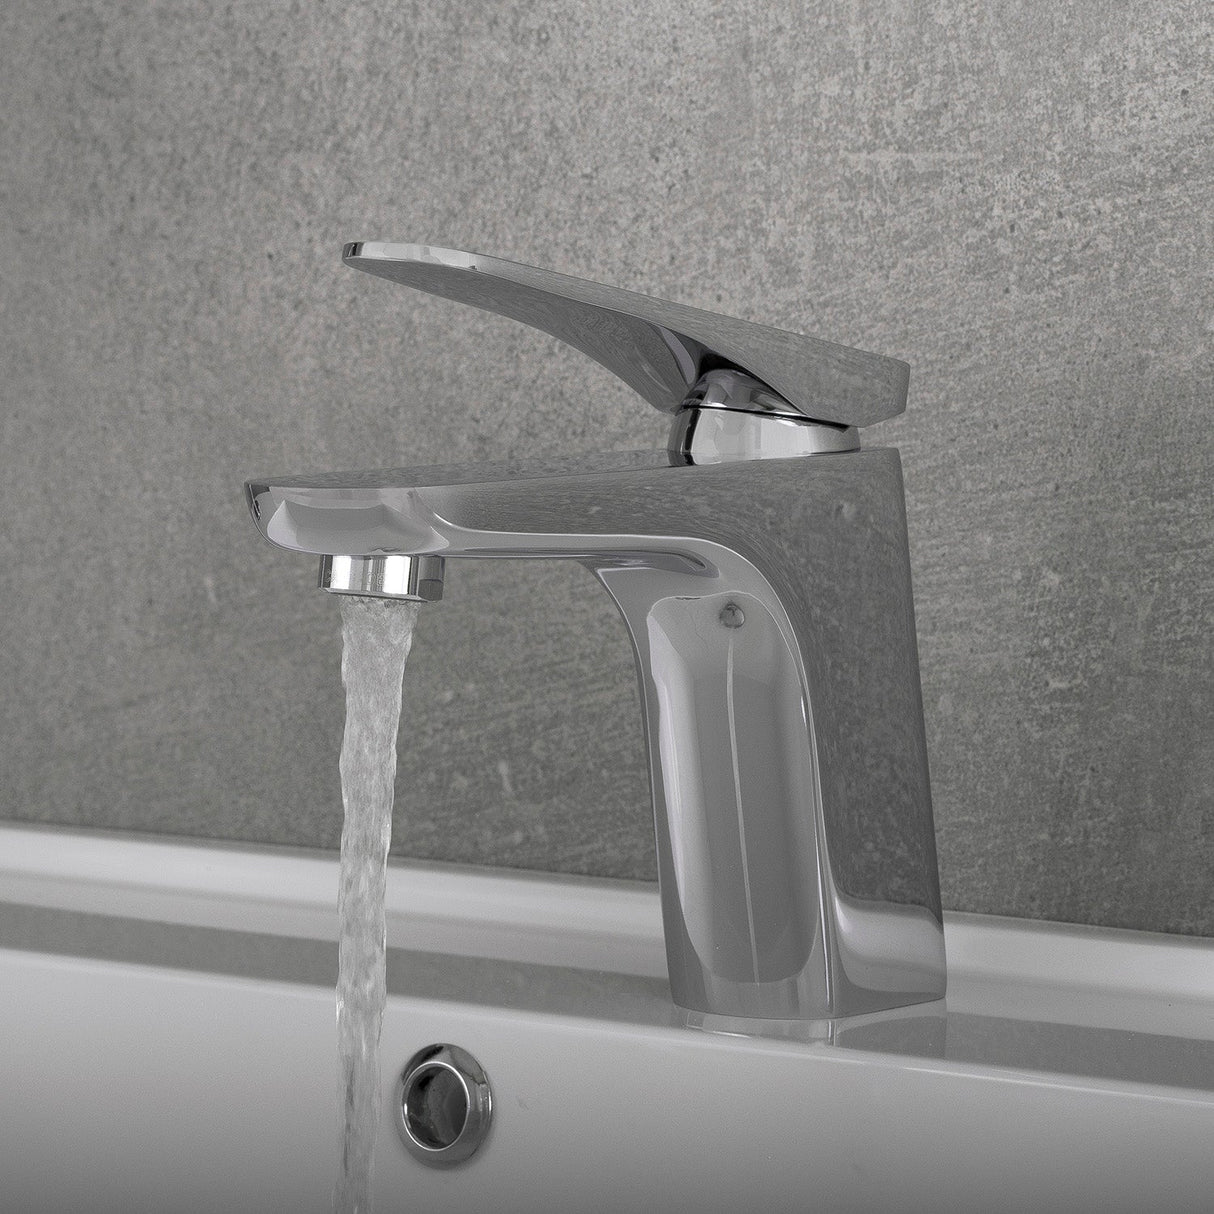 DAX Brass Tub Faucet with Hand Shower and Waterfall Spout, Chrome DAX-805A-CR